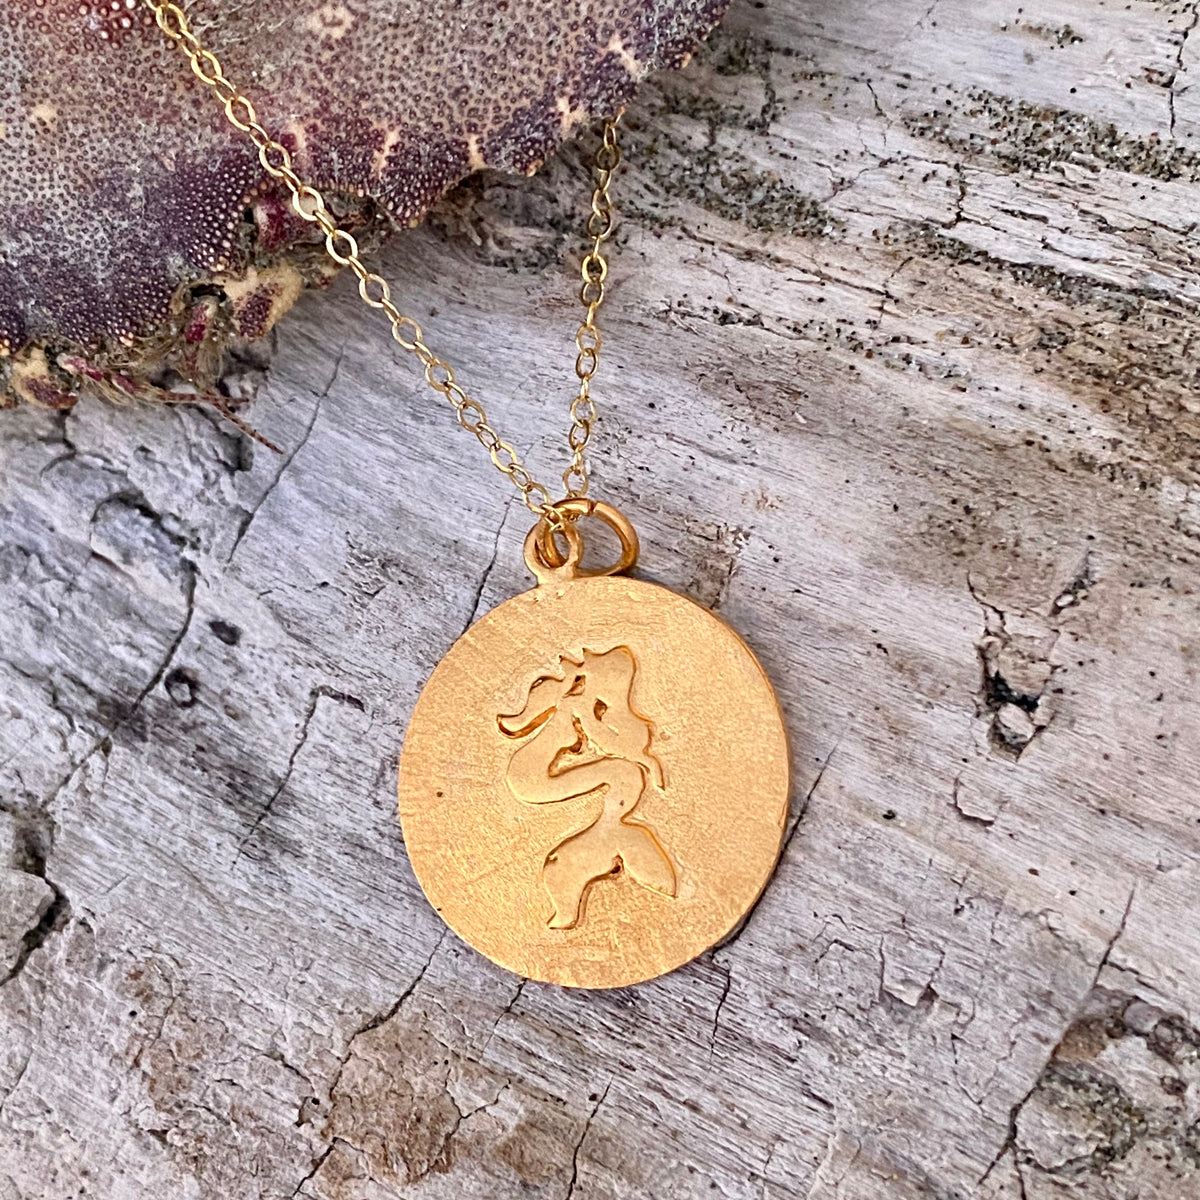 Gold Filled Sitting Mermaid Ocean Inspired Necklace from the Miss Scuba Jewelry Collection